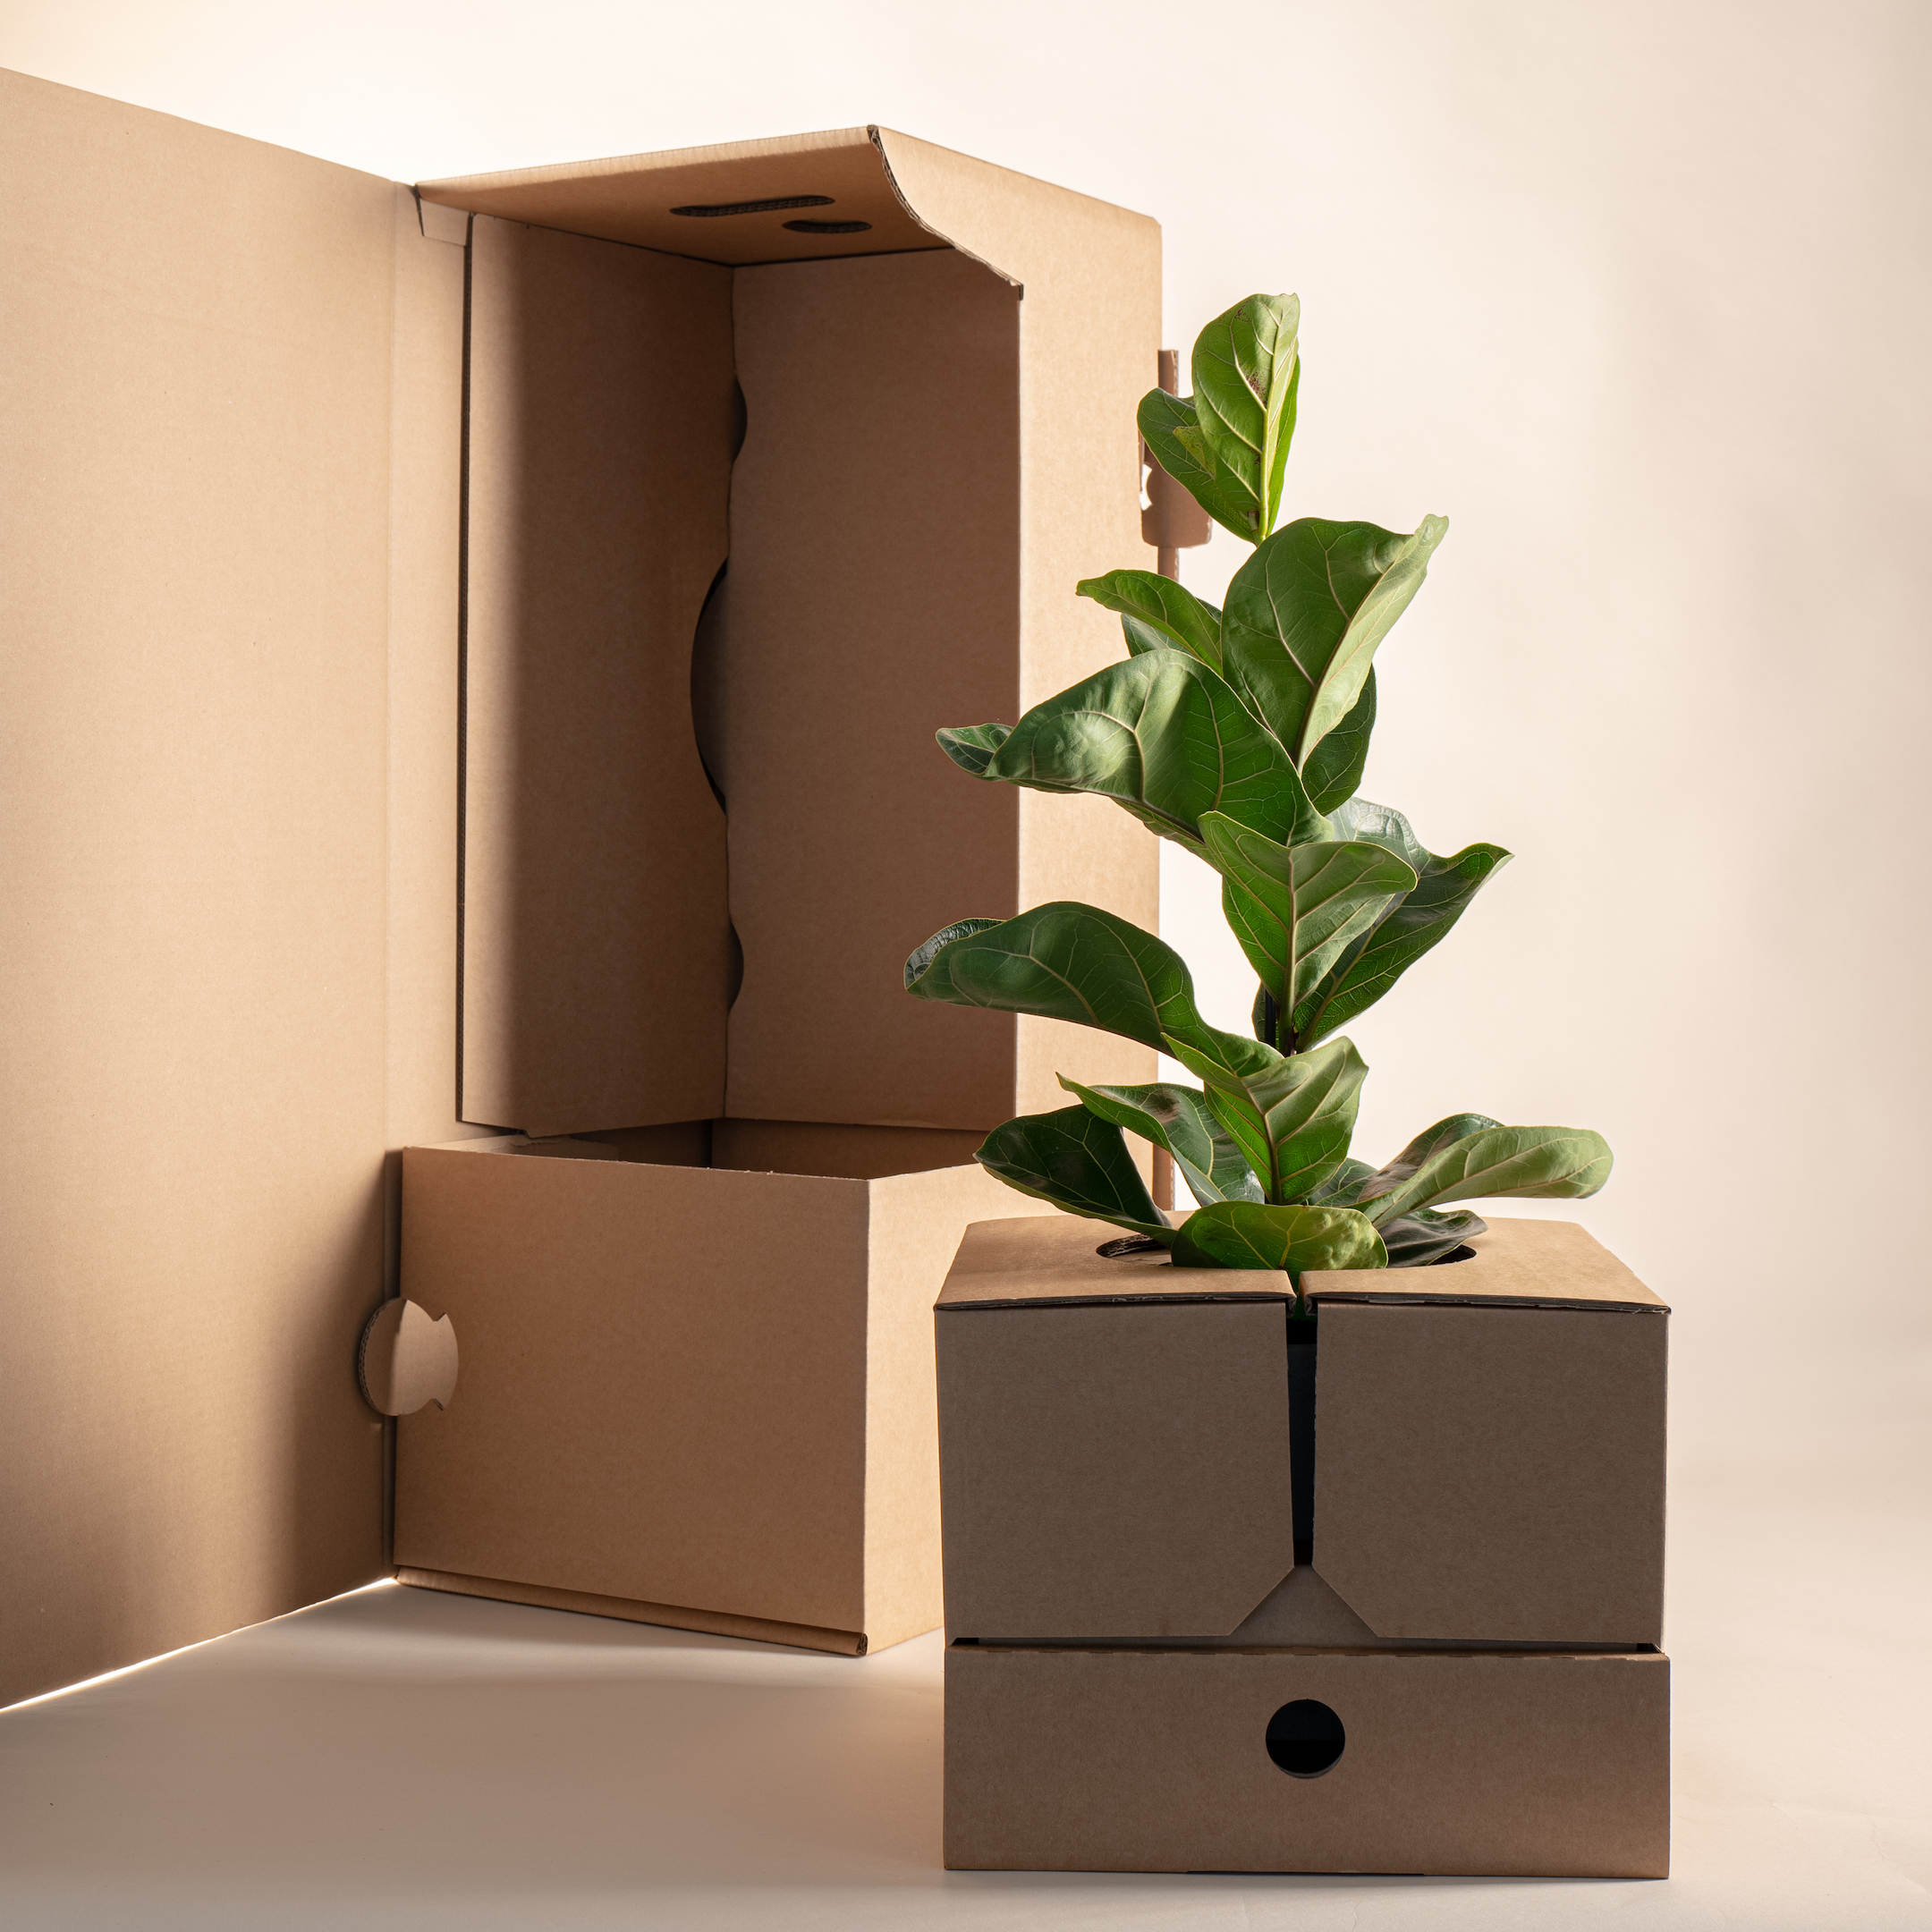 Sustainable shipping packaging